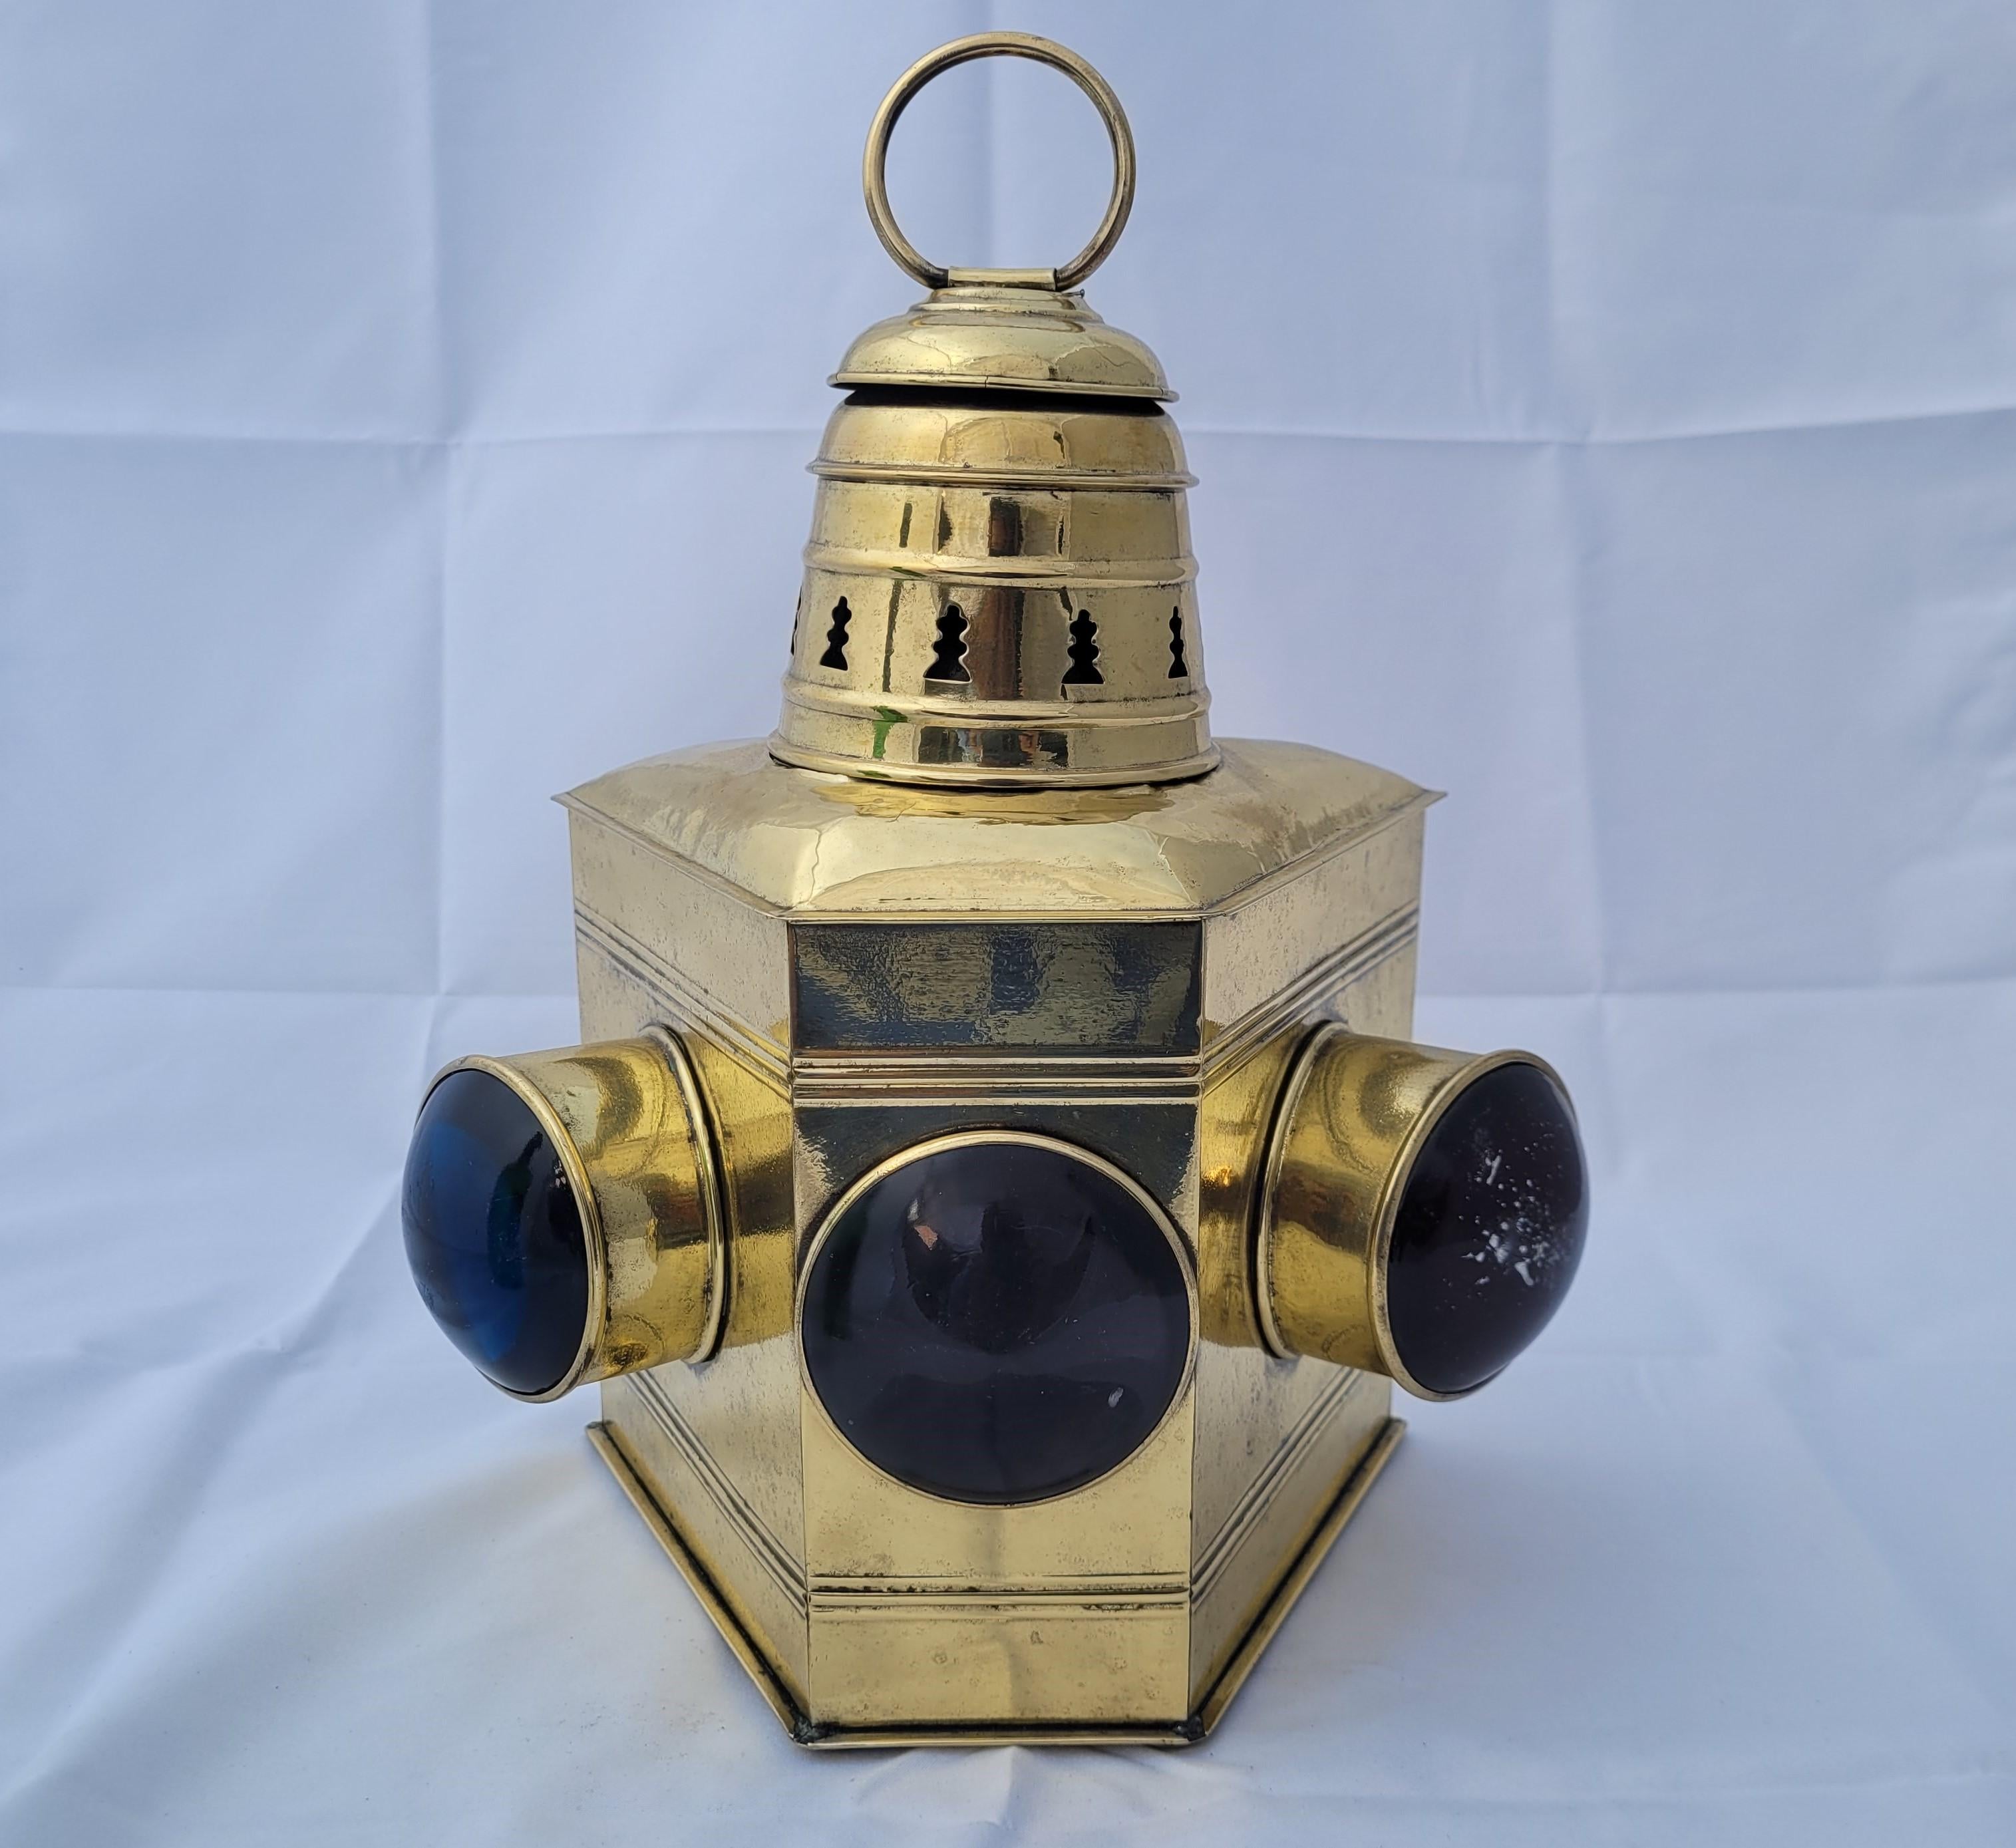 Ships bow lantern from a yacht. Marine lantern with three lenses, clear, port, and starboard. This is a rare piece from the early twentieth century. Vented top and carry ring. With oil tank and wick

Weight: 3 lbs.
Overall Dimensions: 12